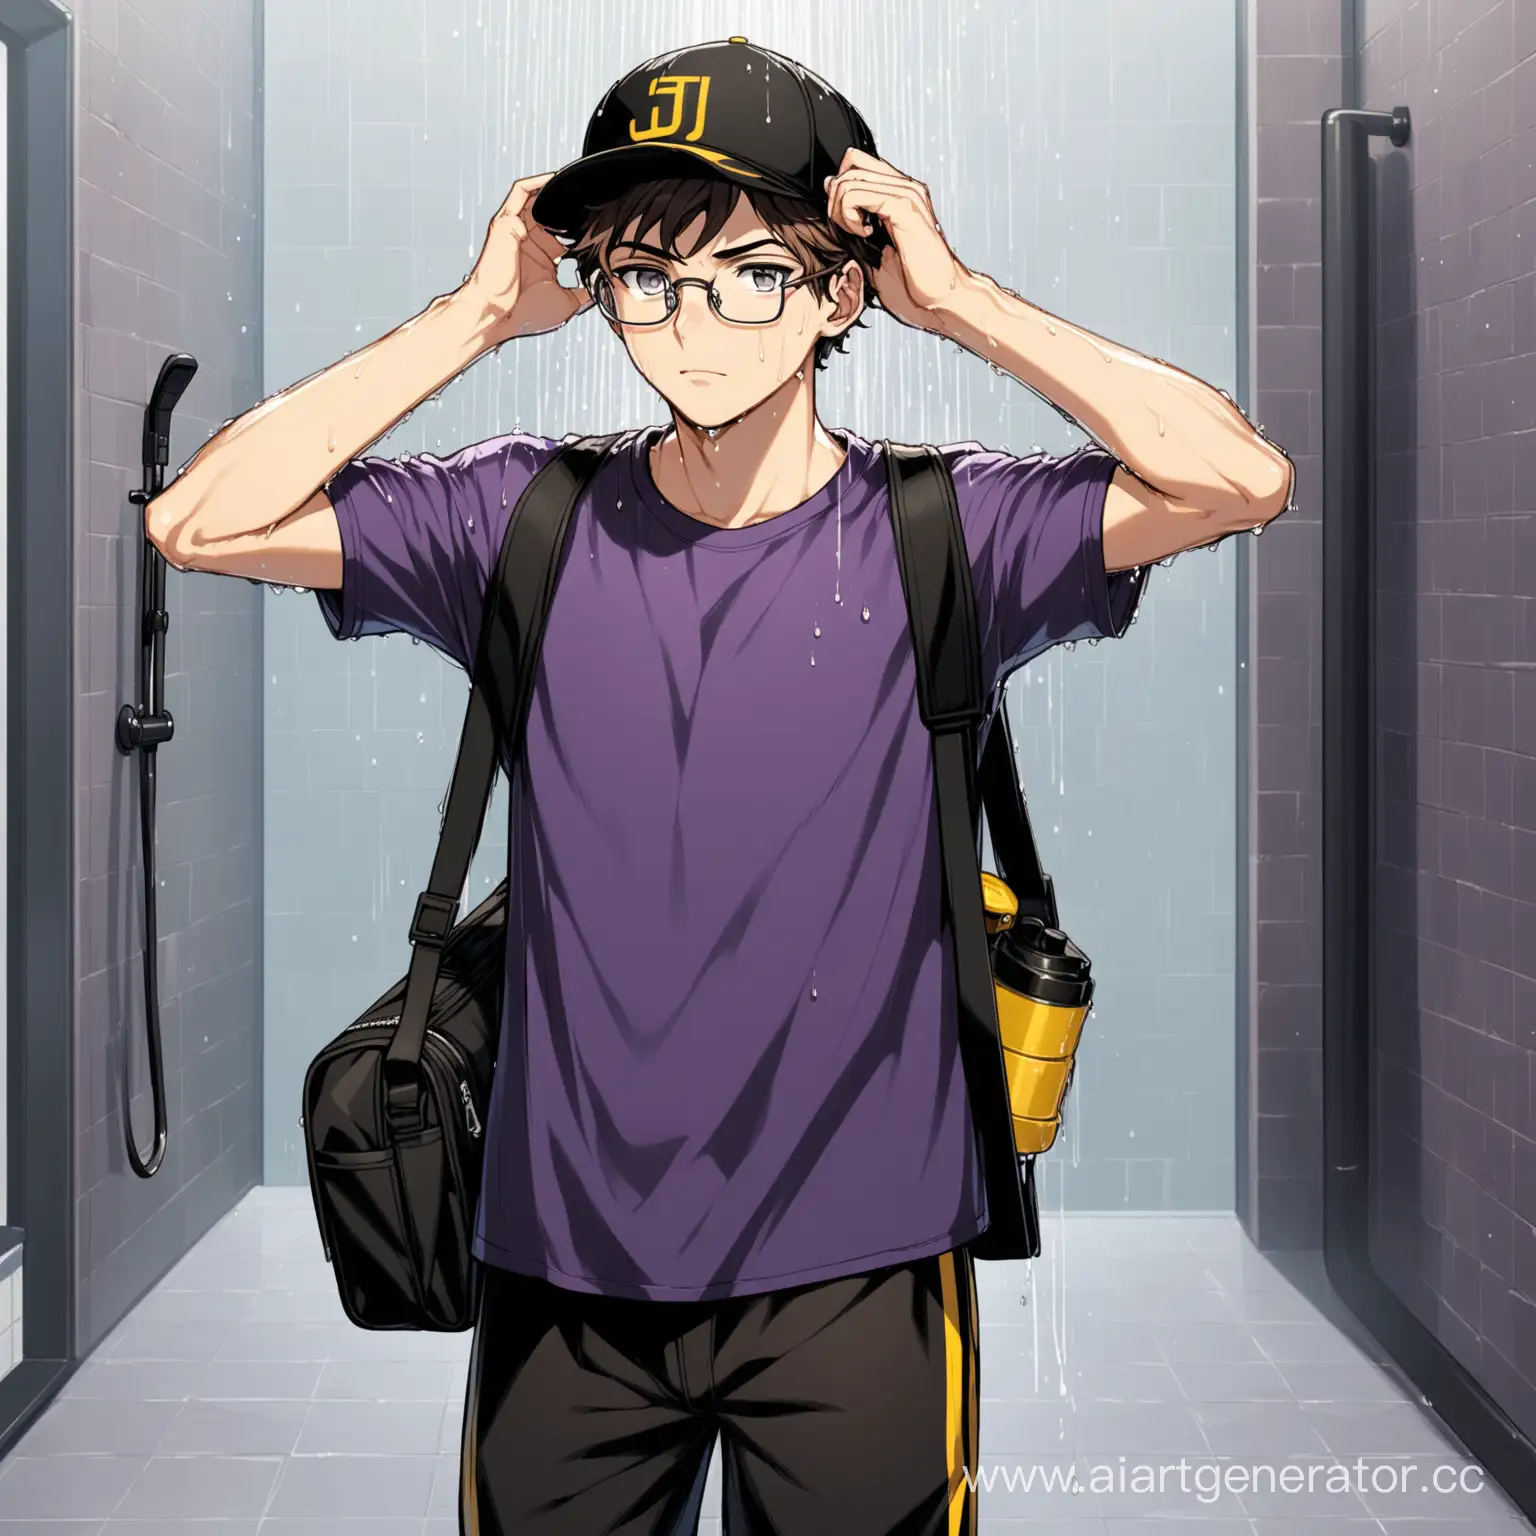 Stylish-Young-Man-in-Urban-Fashion-with-Black-Jotaro-Cap-and-Glasses